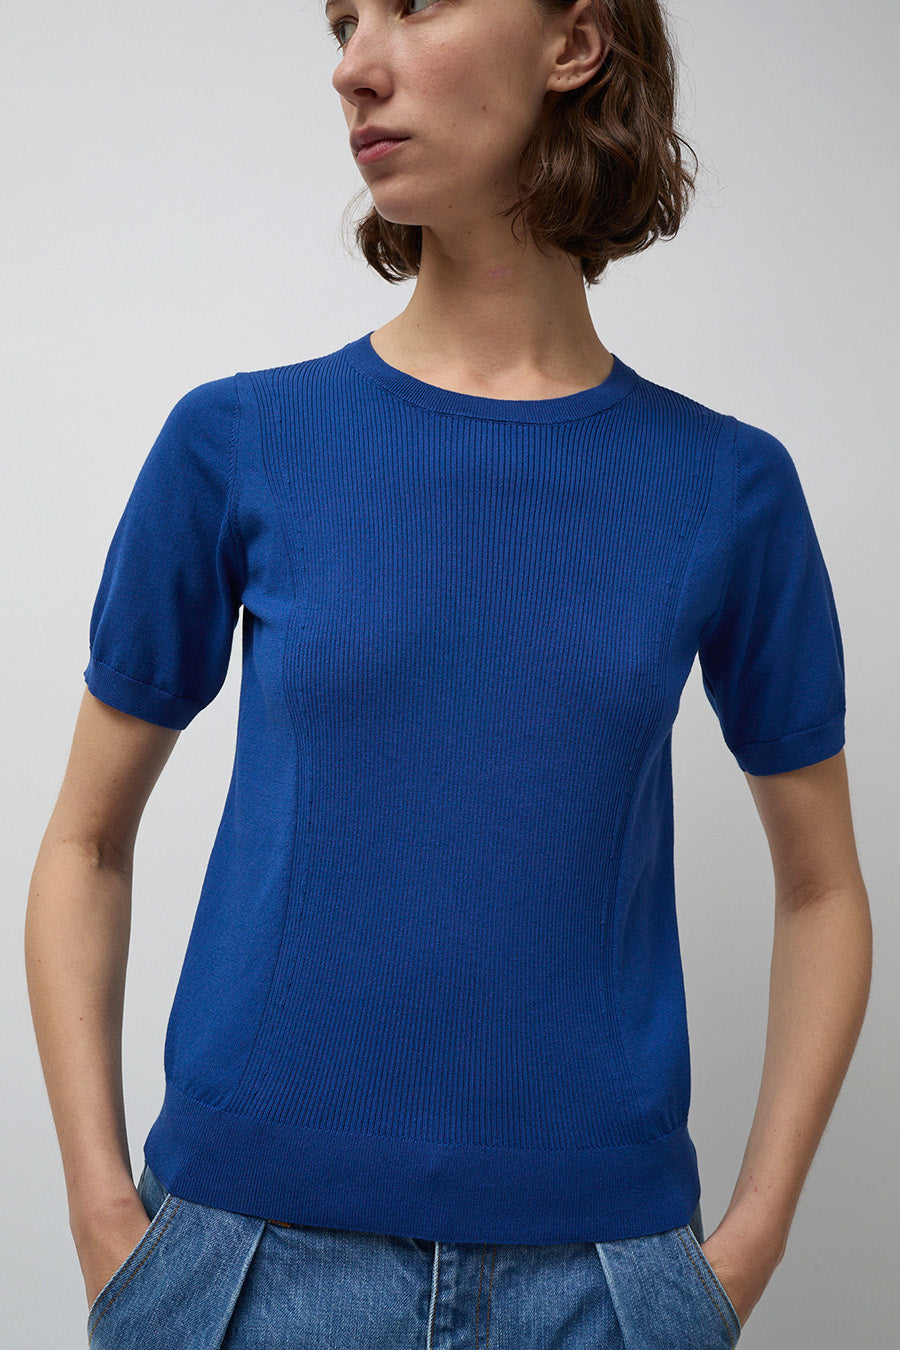 Rue Blanche Sky Top in Royal